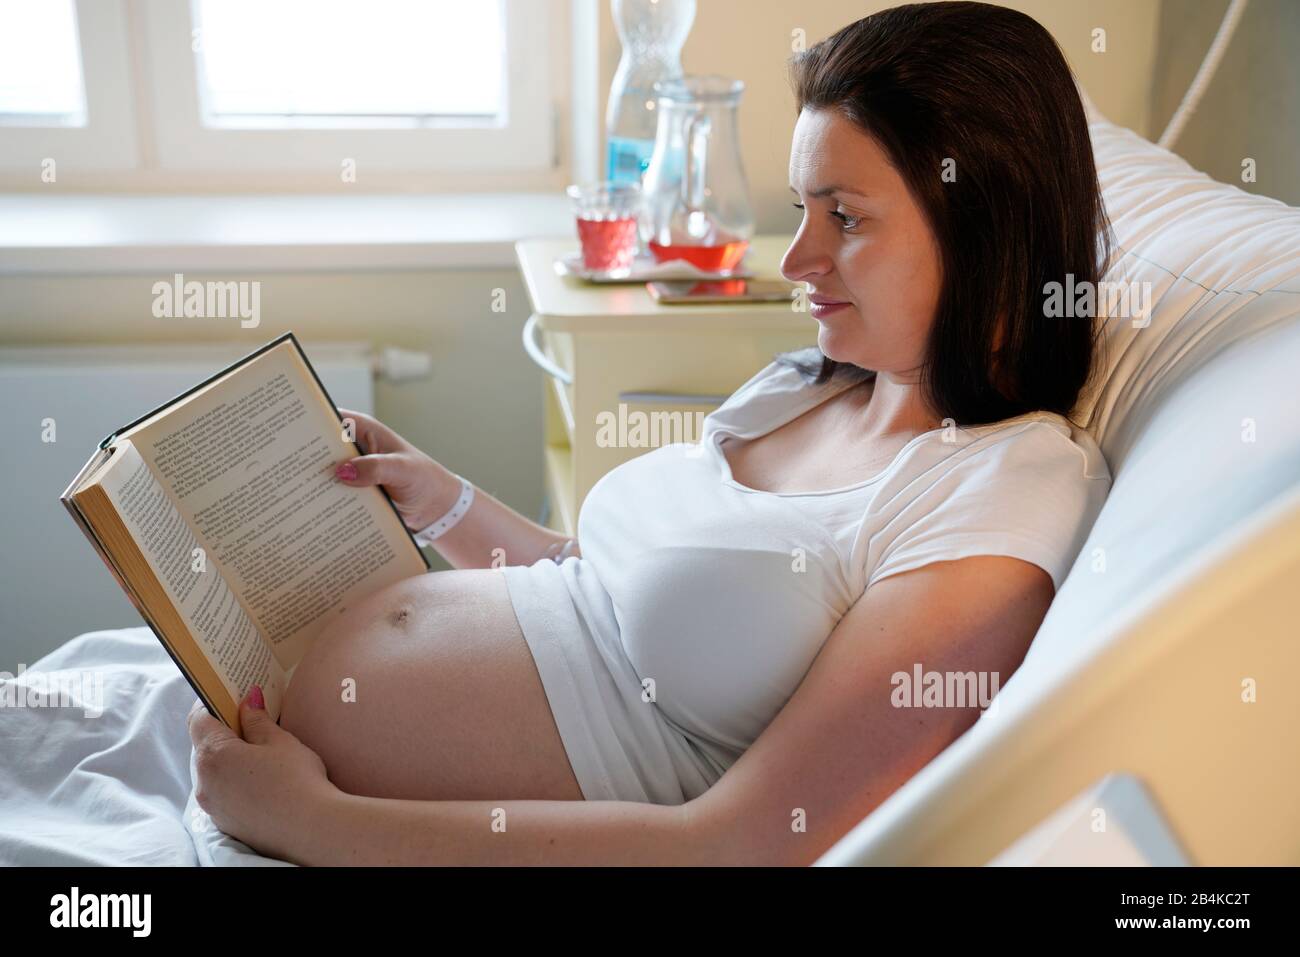 High-risk pregnancy, pregnant woman with book in bed in hospital, Stock Photo